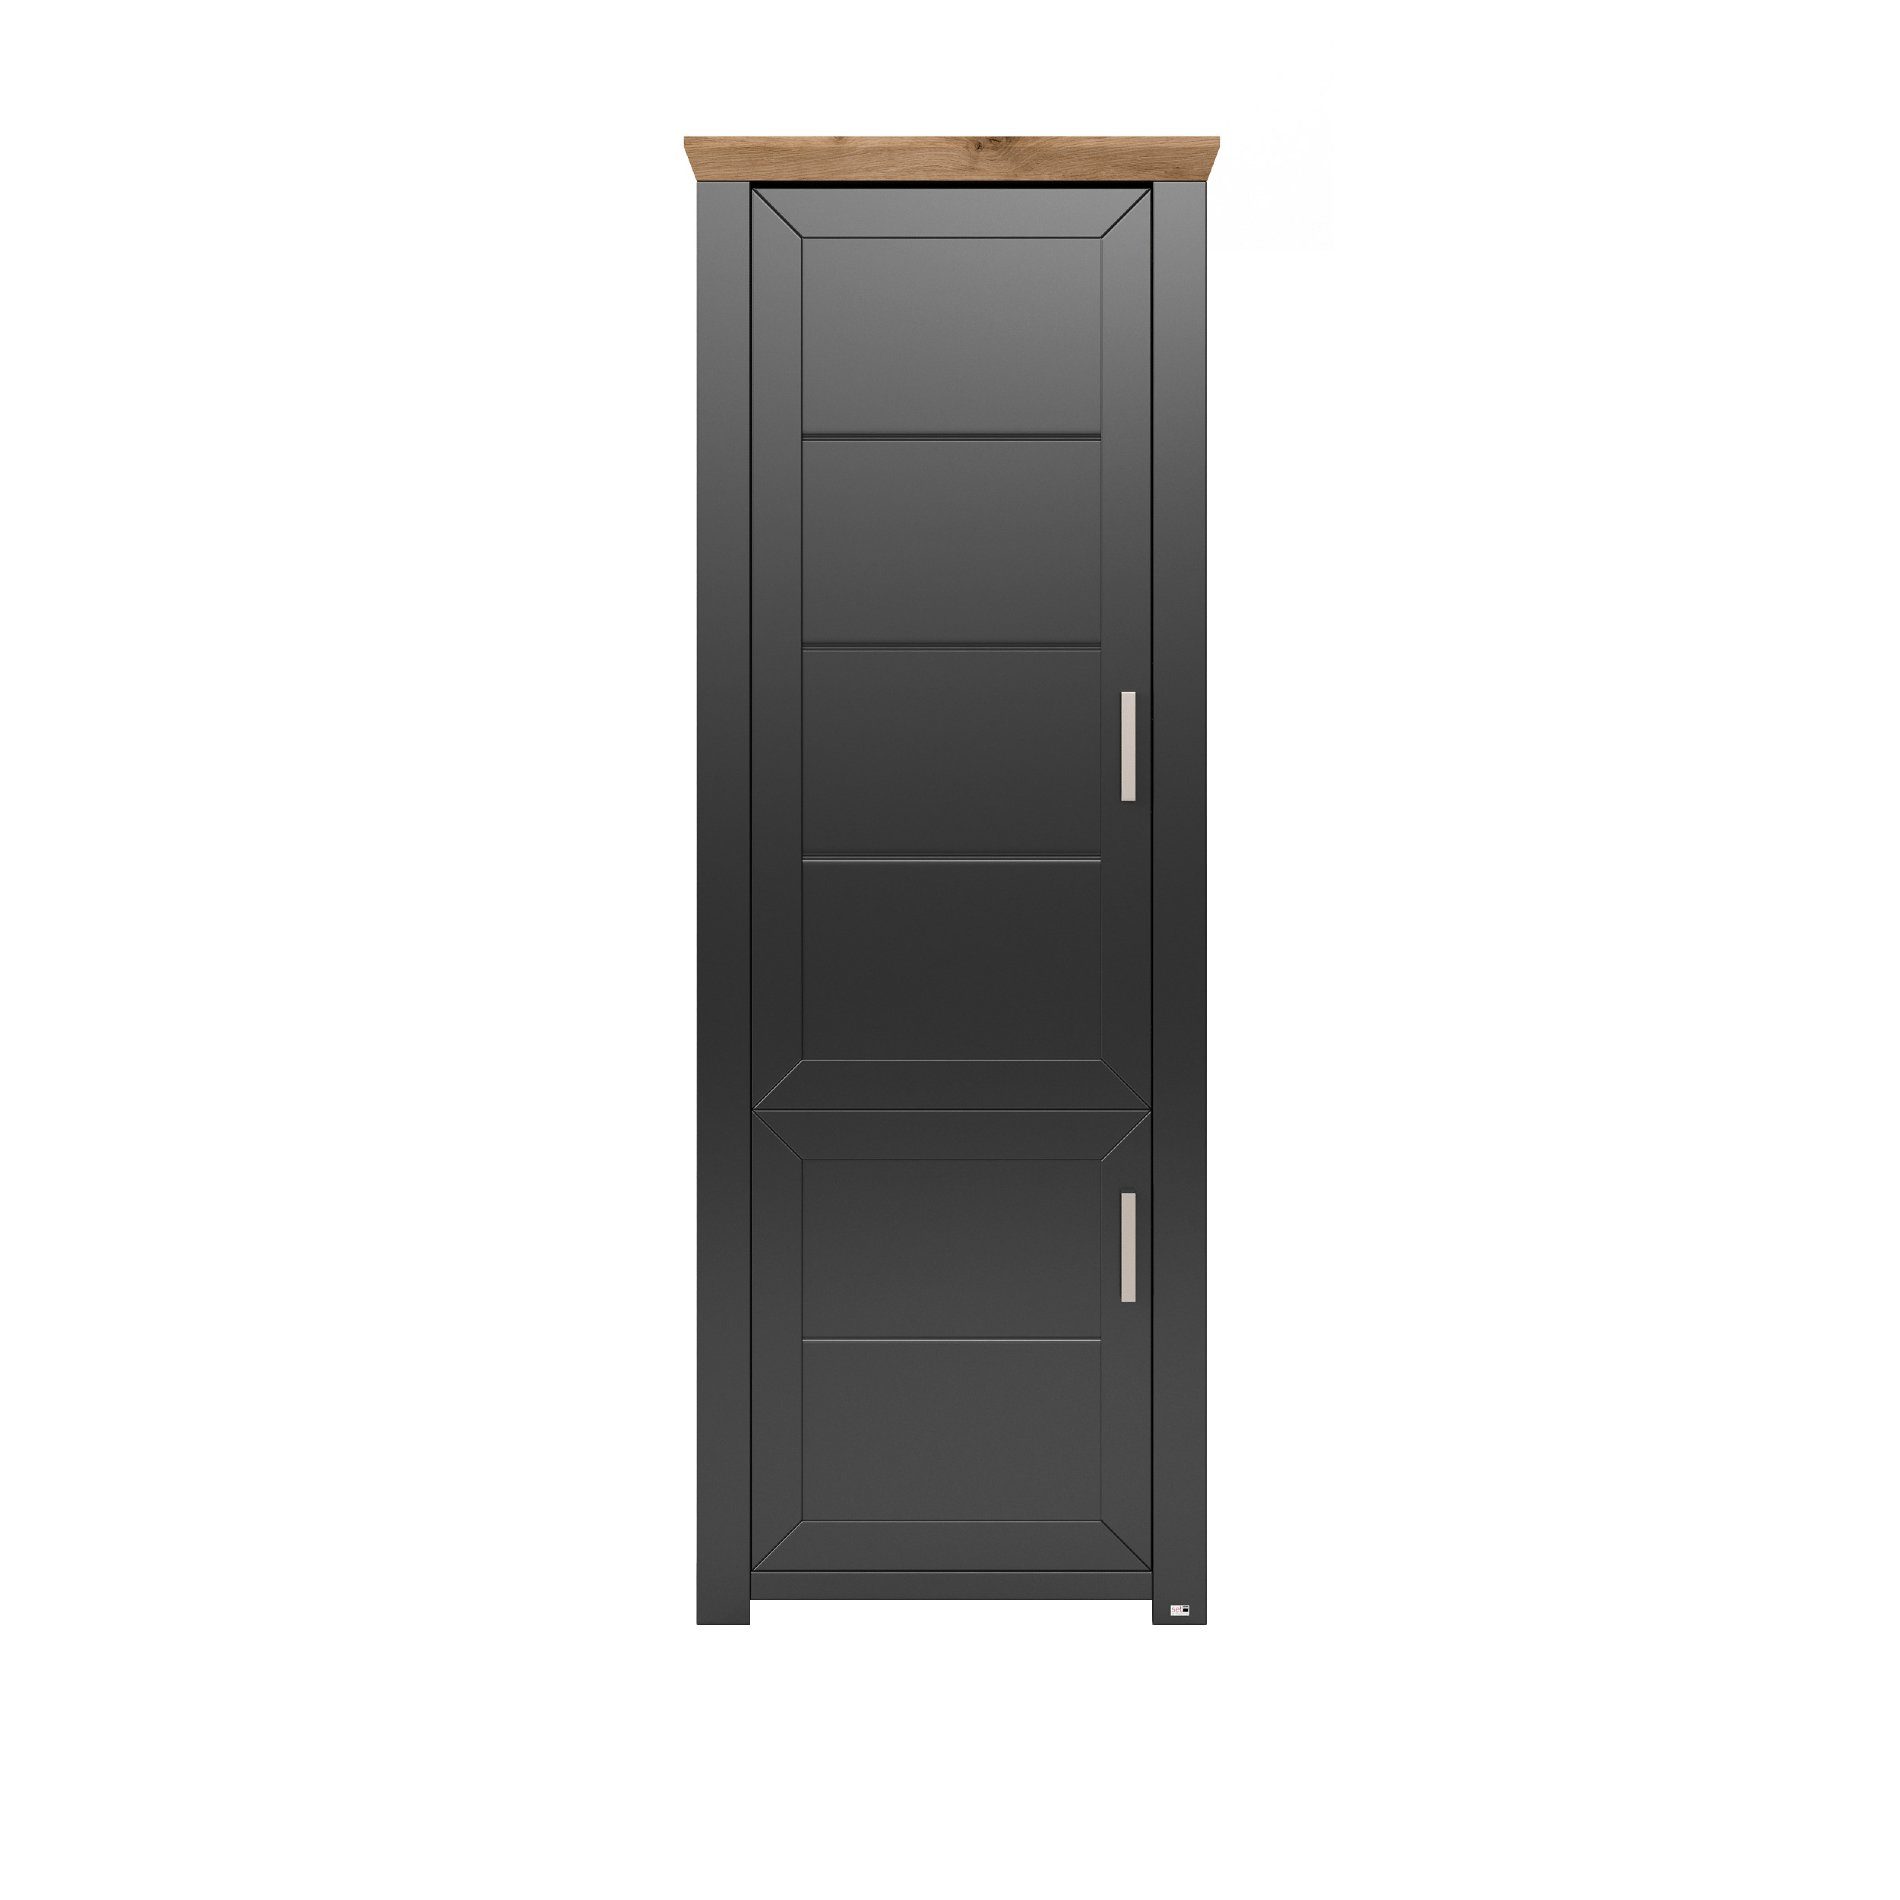 03 one Type Musterring York Schrank set by